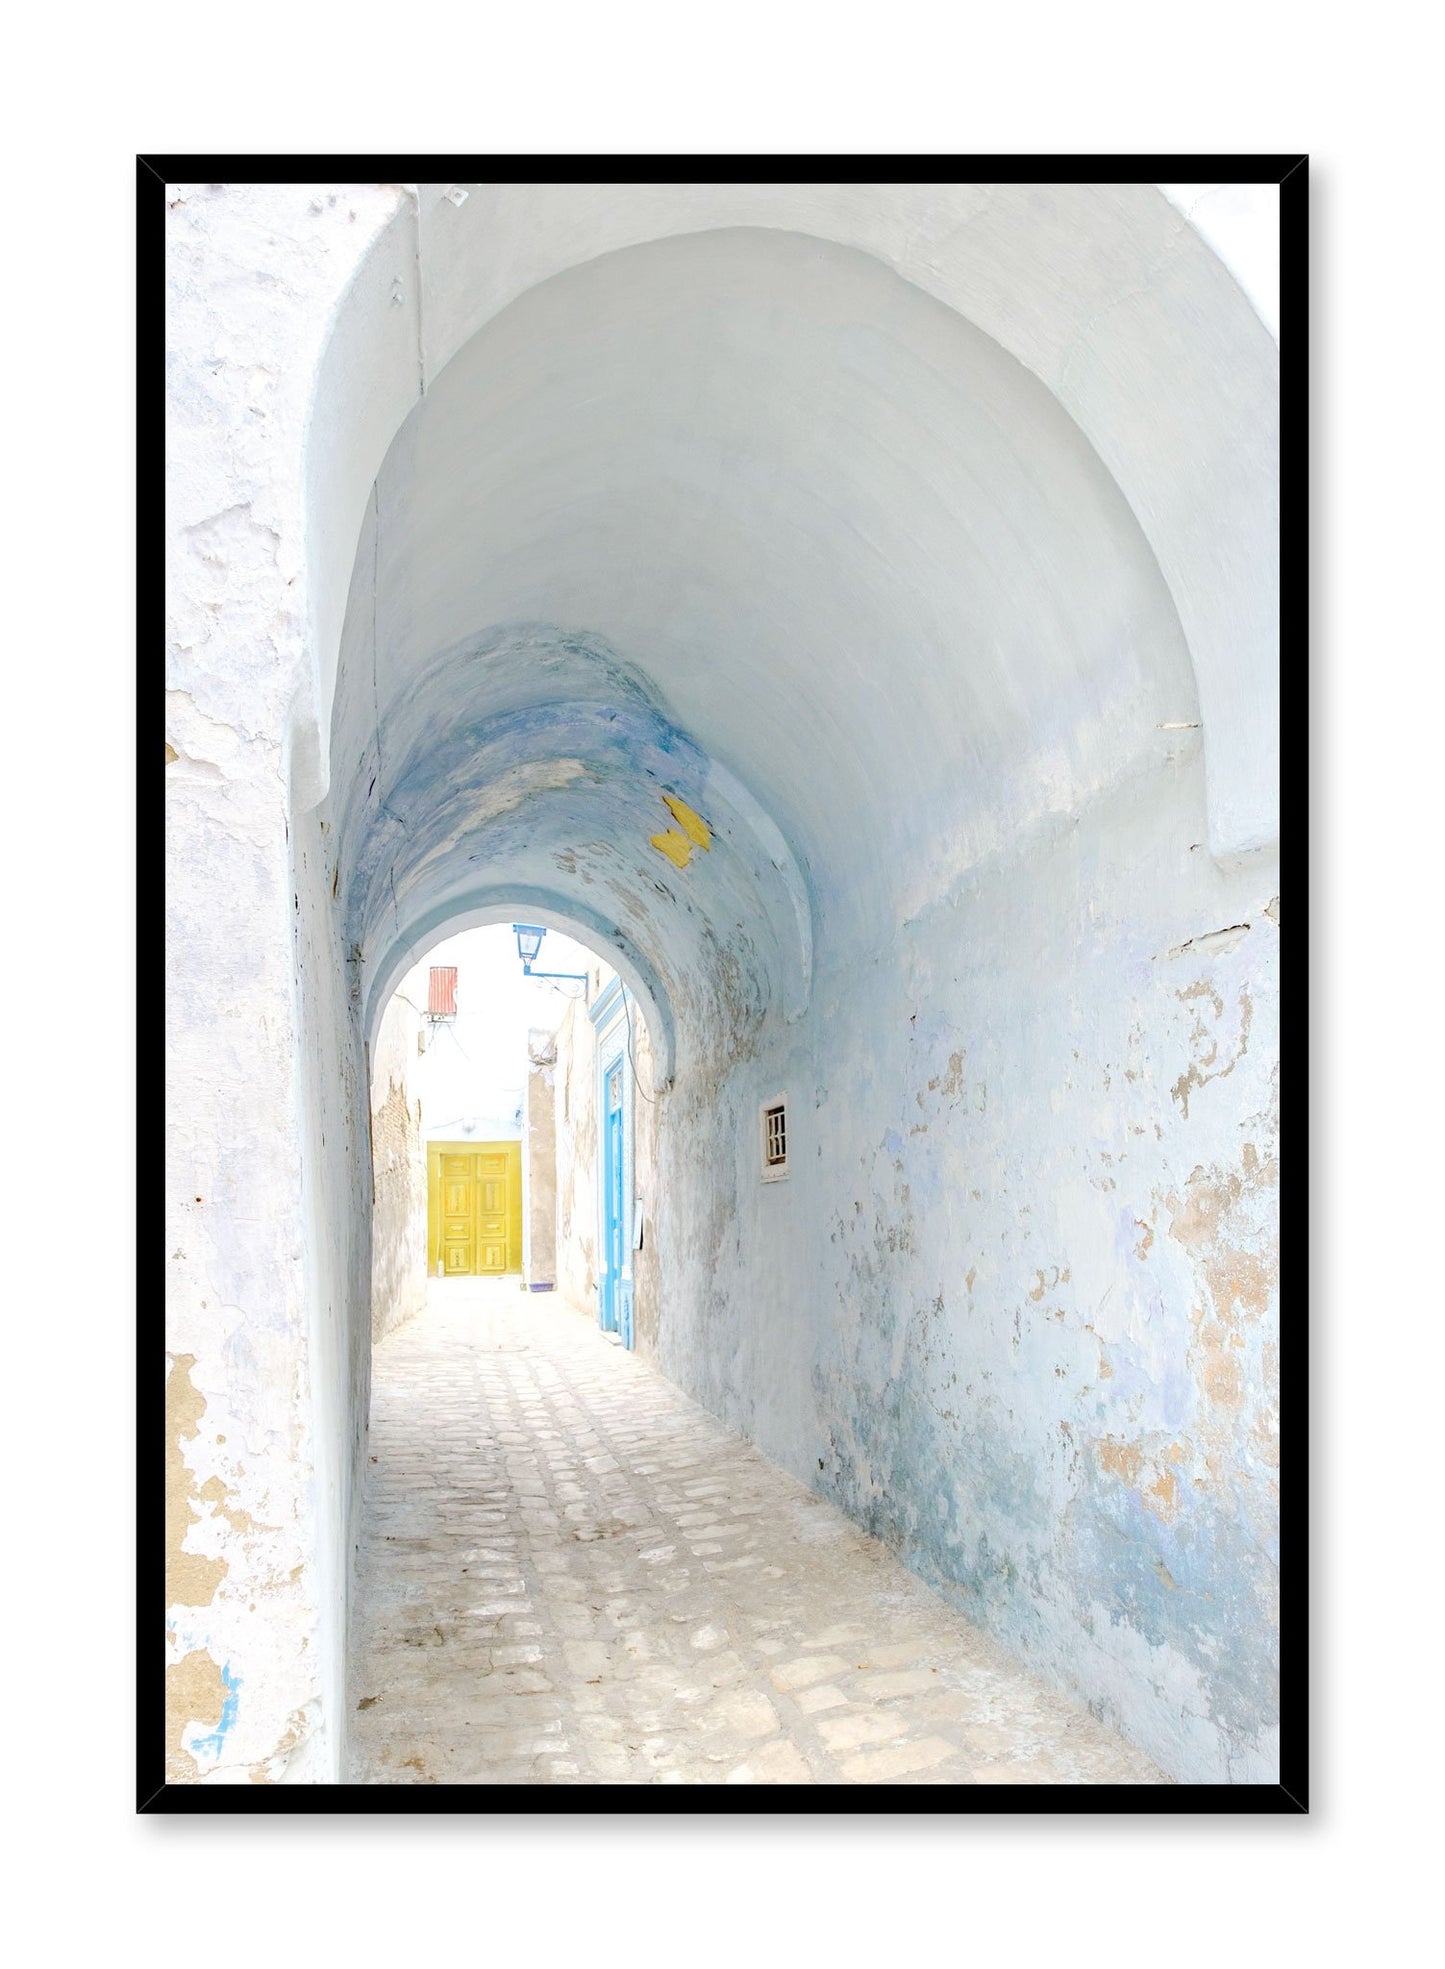 Minimalist design poster by Opposite Wall with photography of covered alleyway